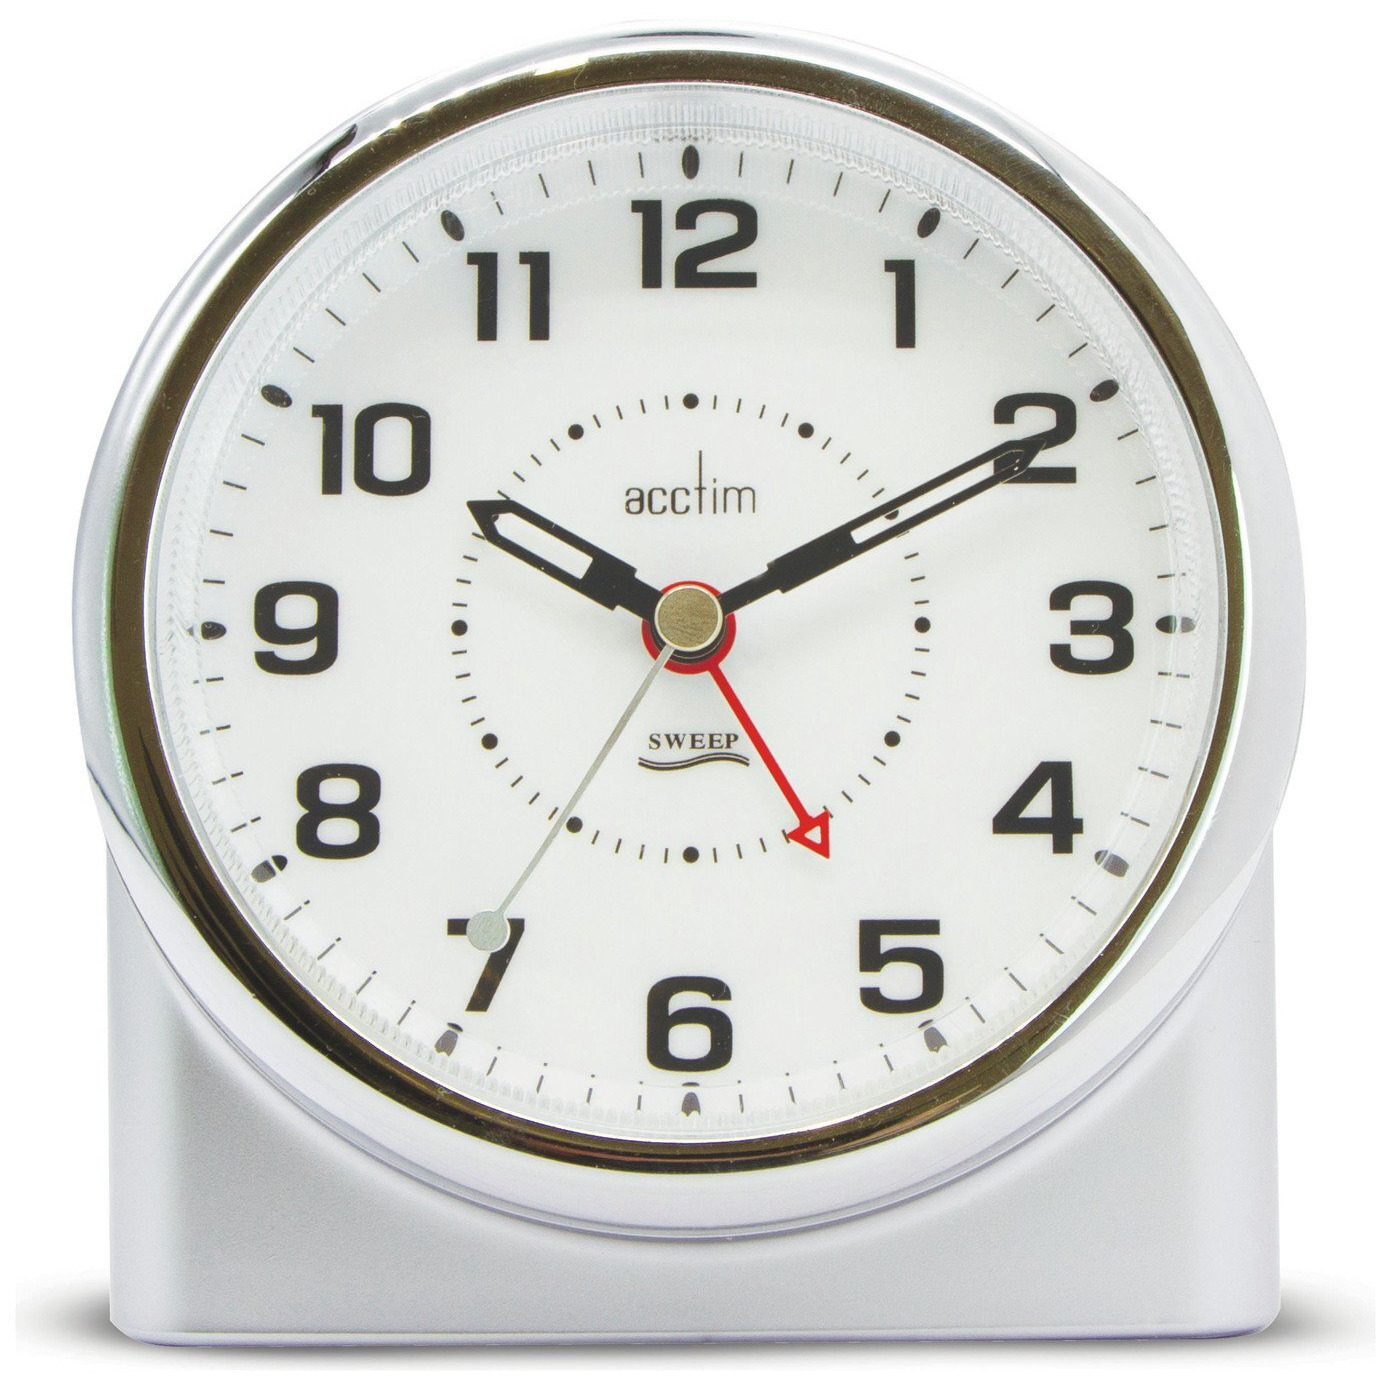 Acctim Centrale Analogue Alarm Clock - Silver - image 1